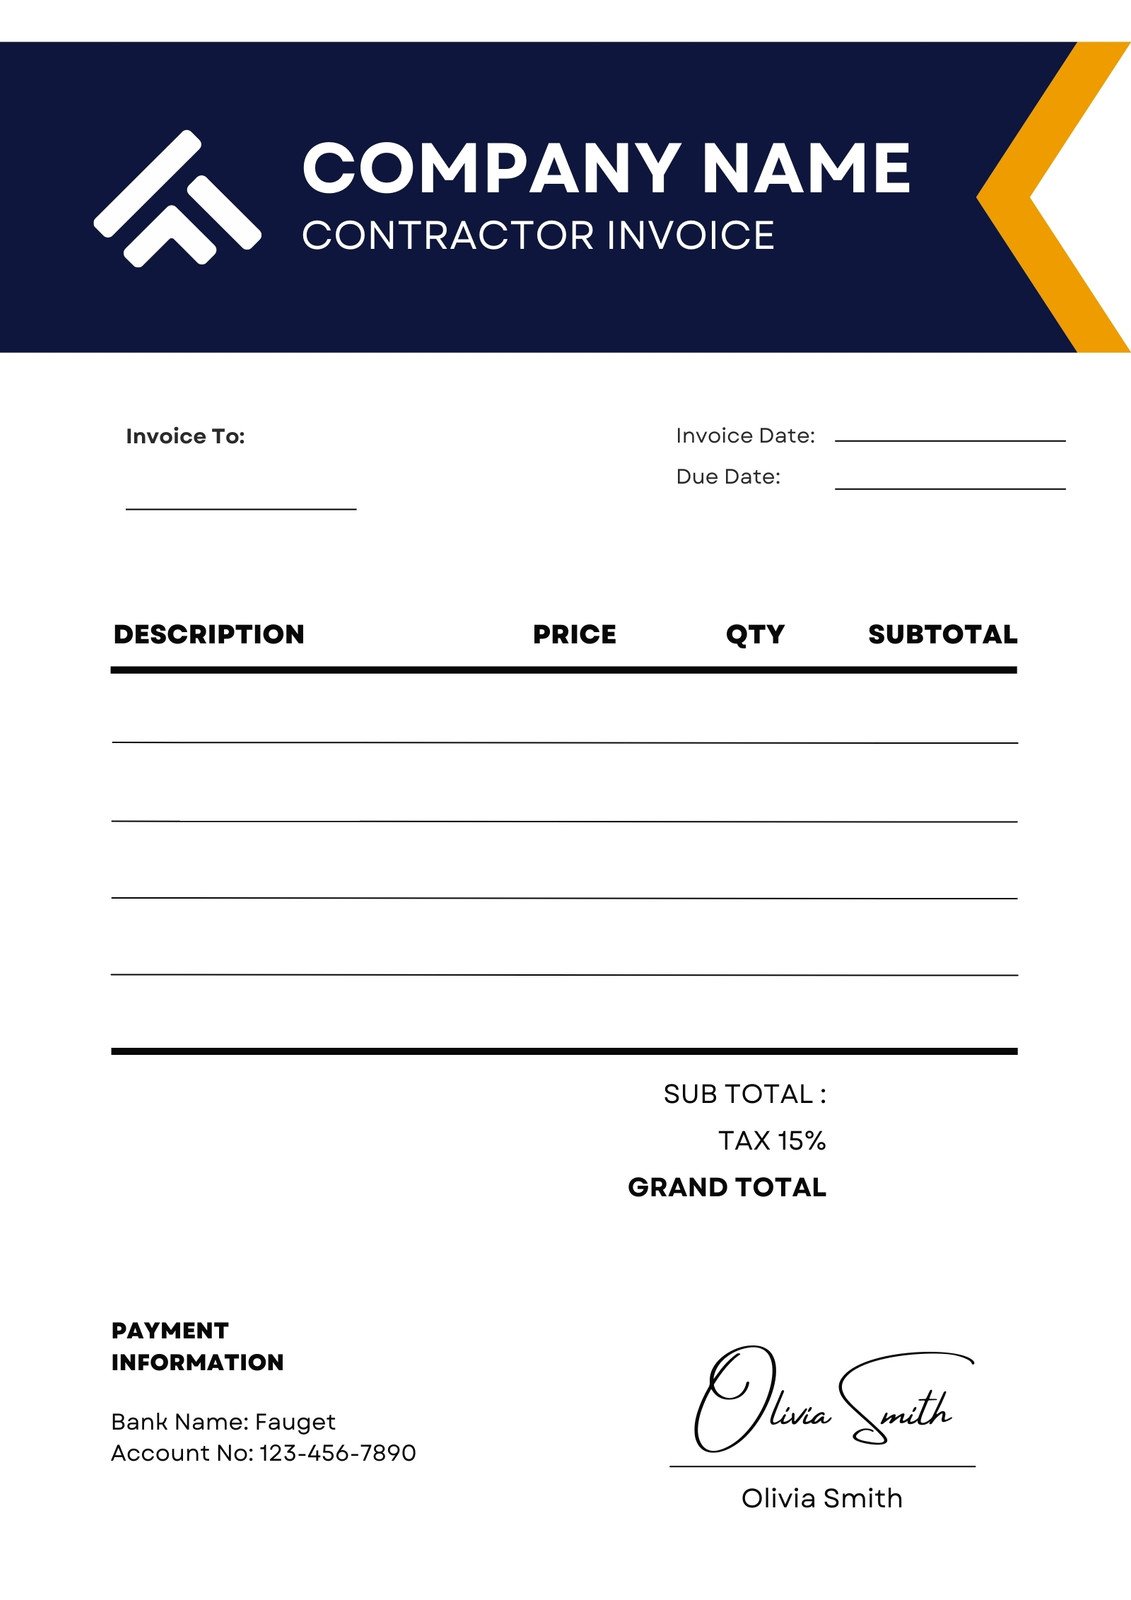 Page 5 - Free, printable, professional invoice templates to customize |  Canva